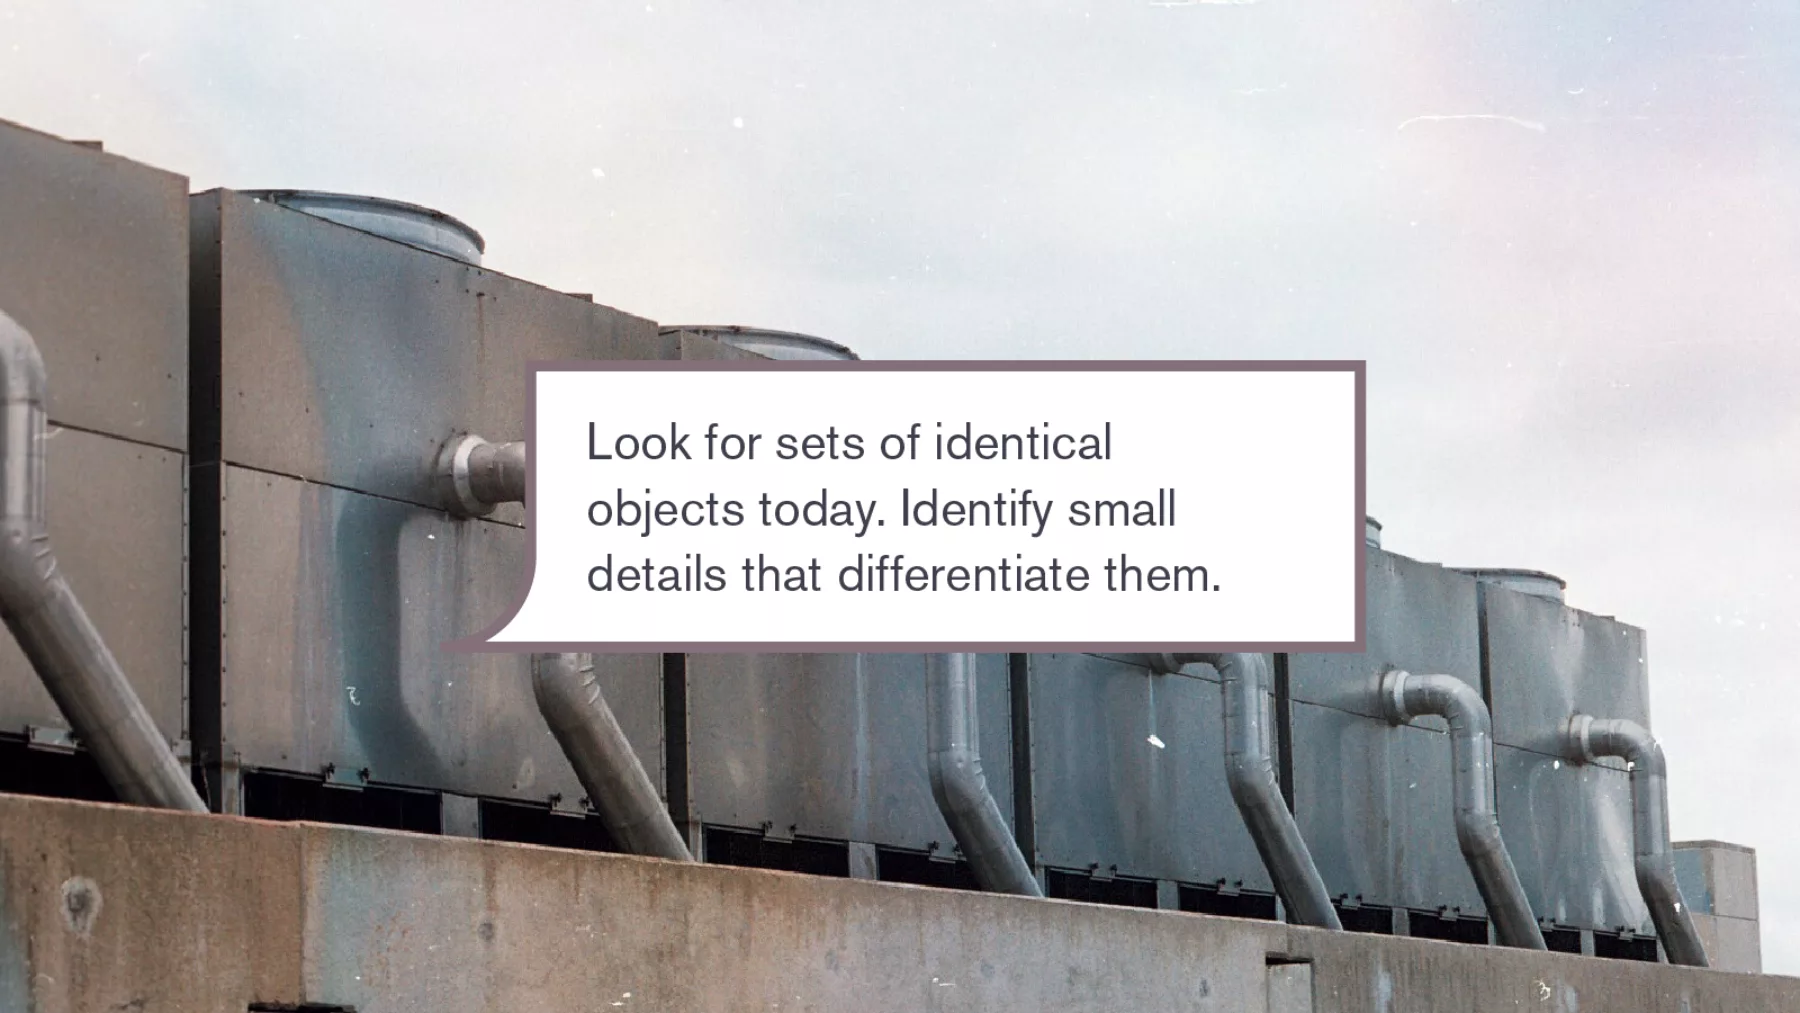 Photograph of repeated machinery, overlaid with walking prompt: "Look for sets of identical objects today. Identify small details that differentiate them."